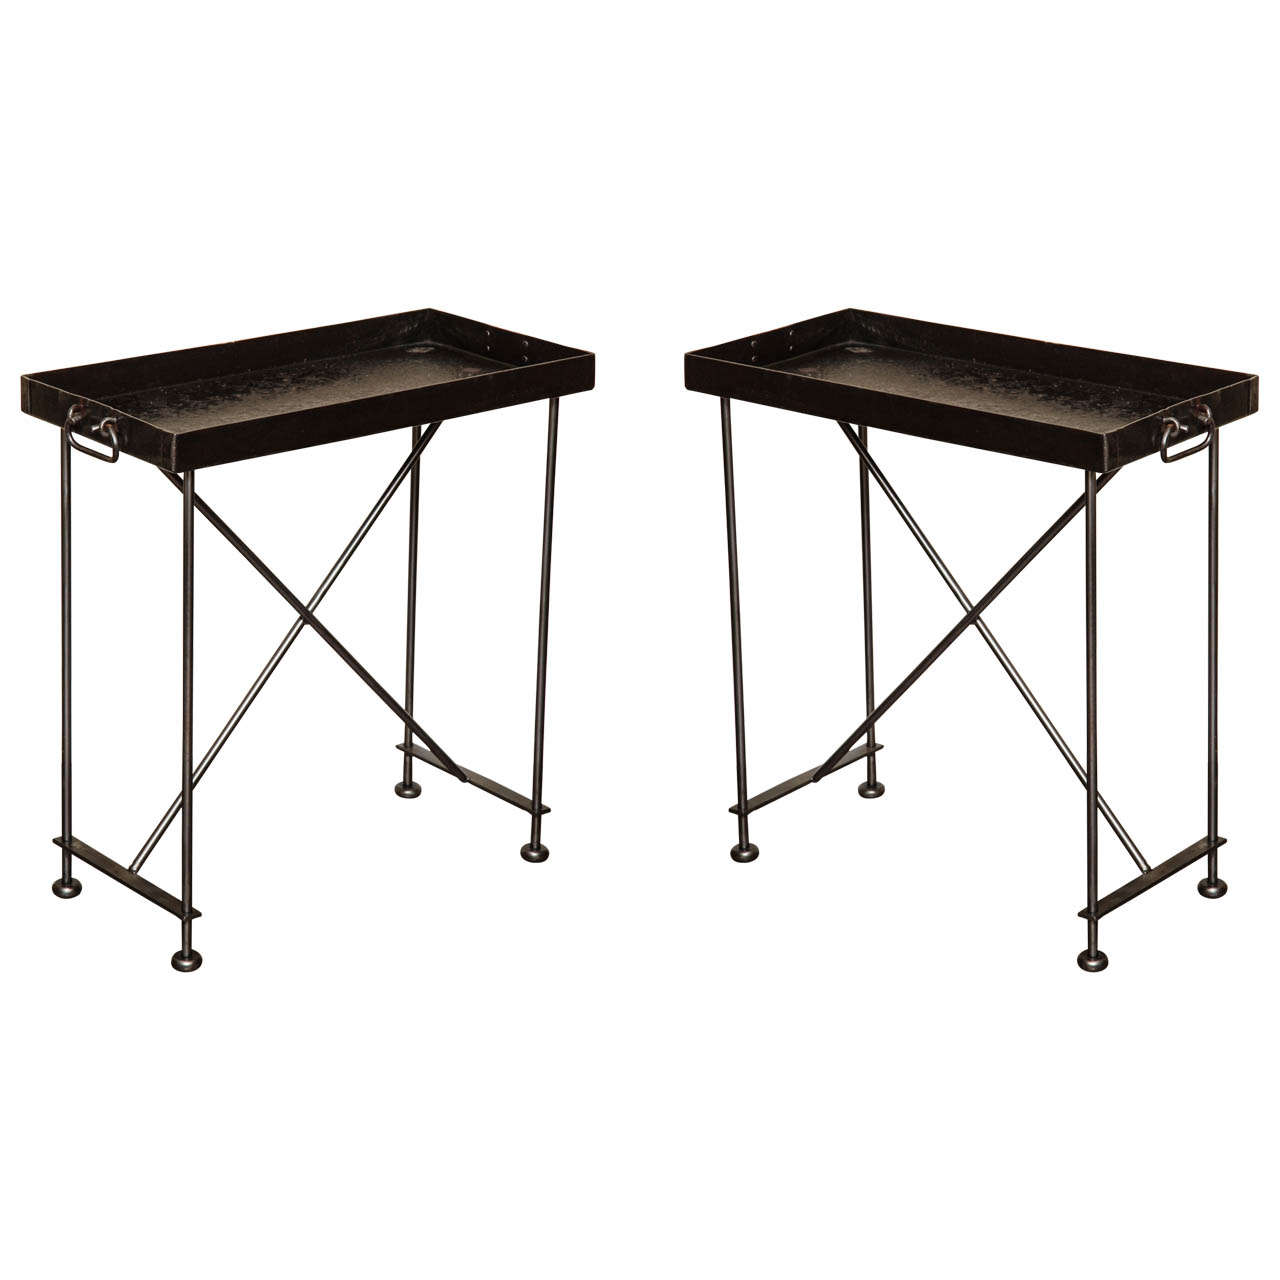 Pair of Steel Tray Tables